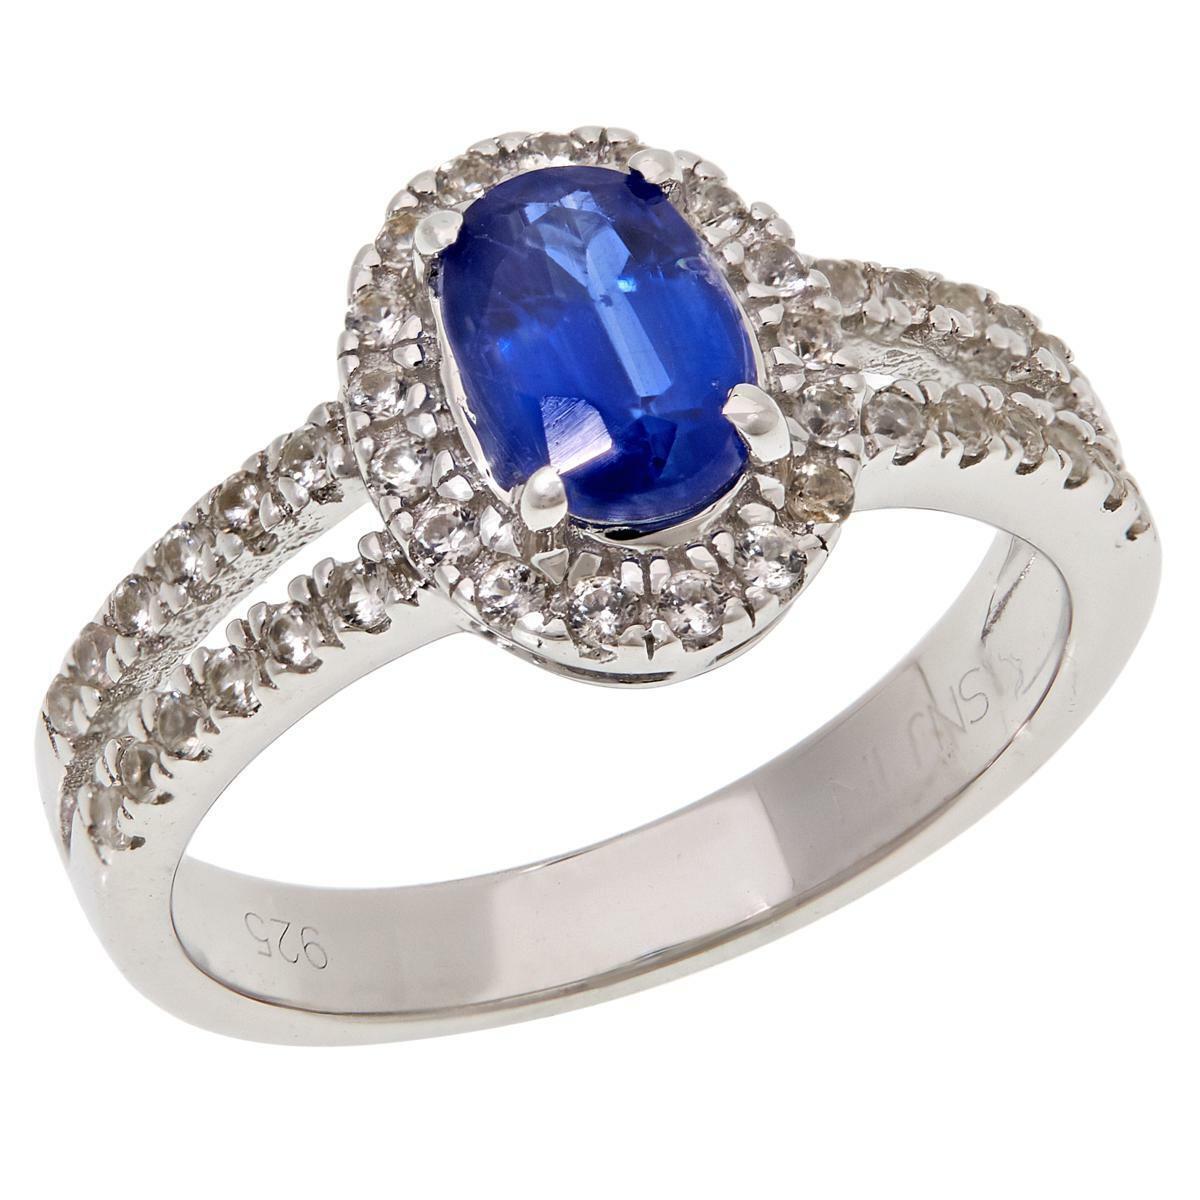 Colleen Lopez Sterling Silver Kyanite and White Zircon Halo Ring, Size 7